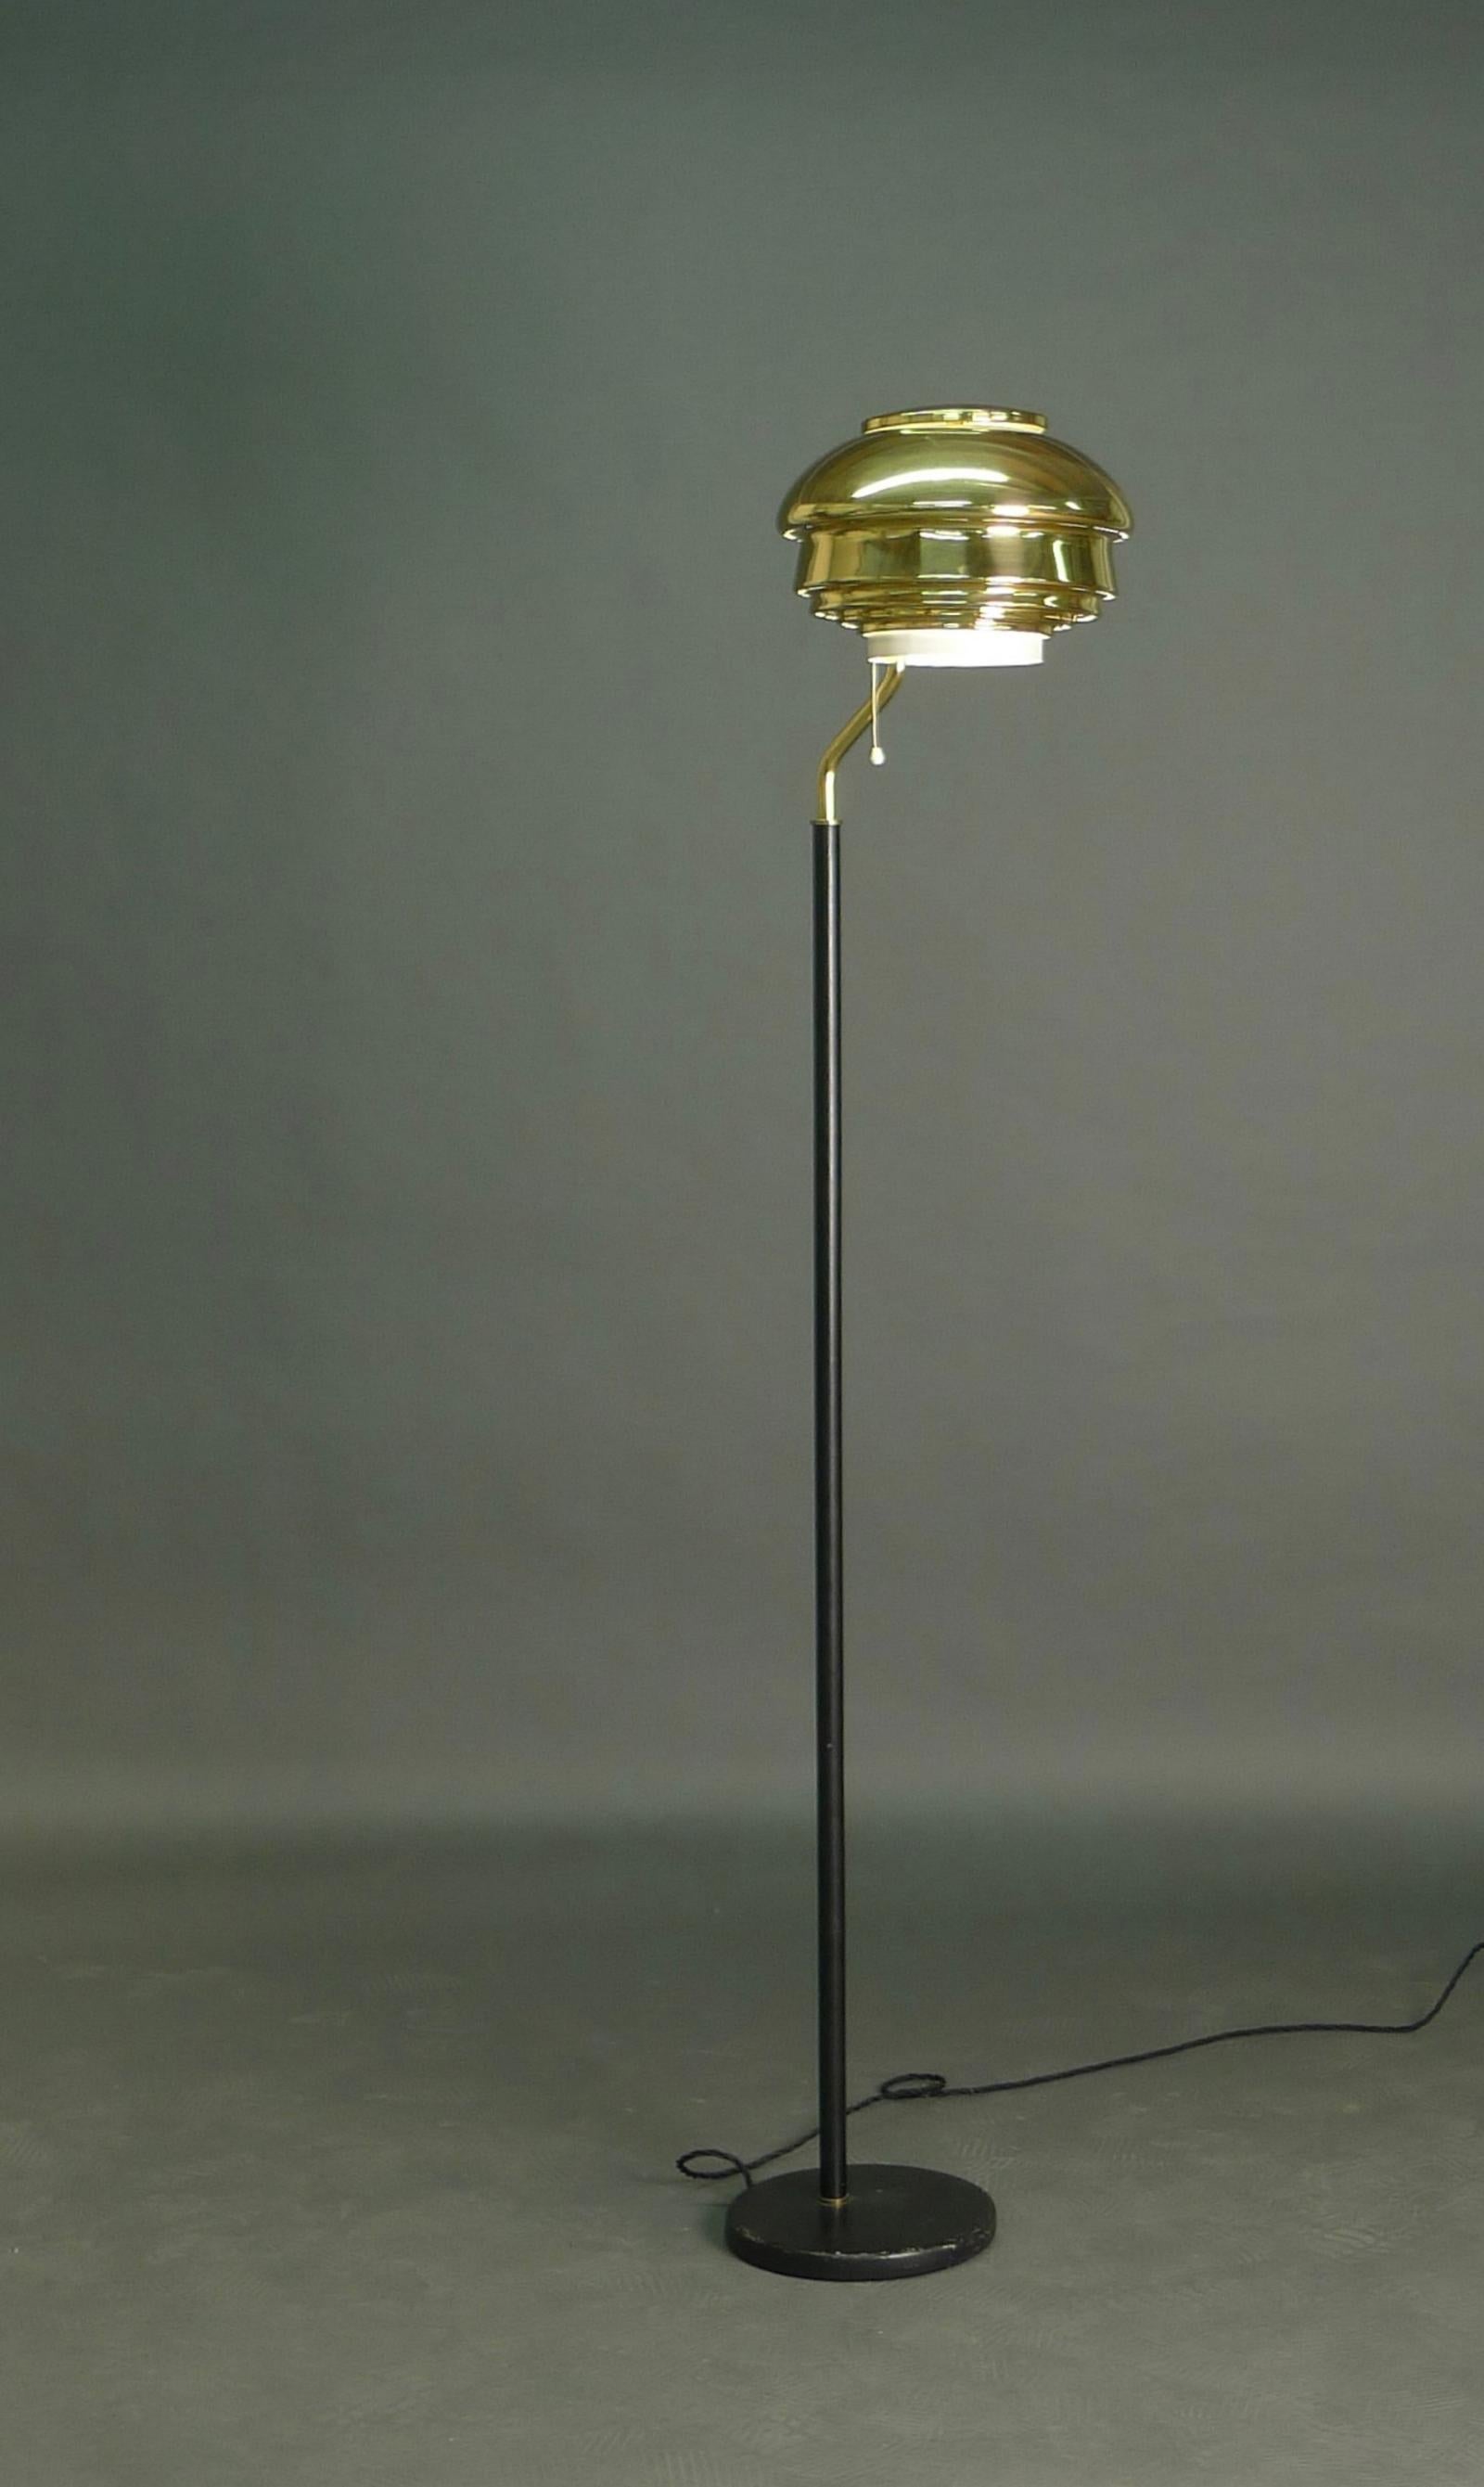 Early floor lamp, model A808, designed by Alvar Aalto and manufactured by Valaistustyö, Finland 1950s.  

The layered brass shade with internal white enamelled metal diffuser and pull cord, extended on a brass arm and black leather covered column